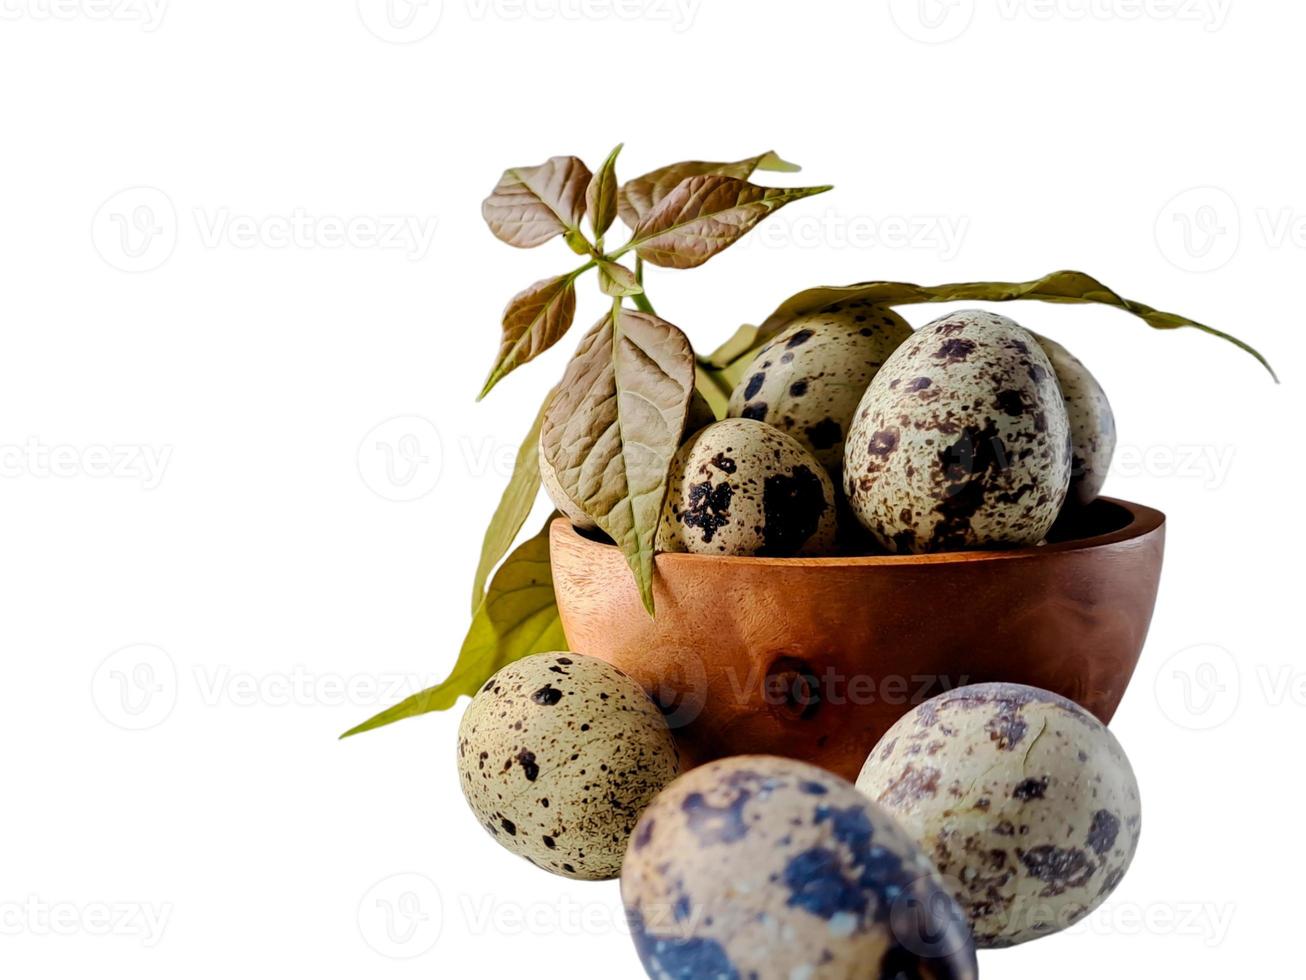 Quail eggs from quail, a collection of quail eggs on a wooden plate with isolated white background photo